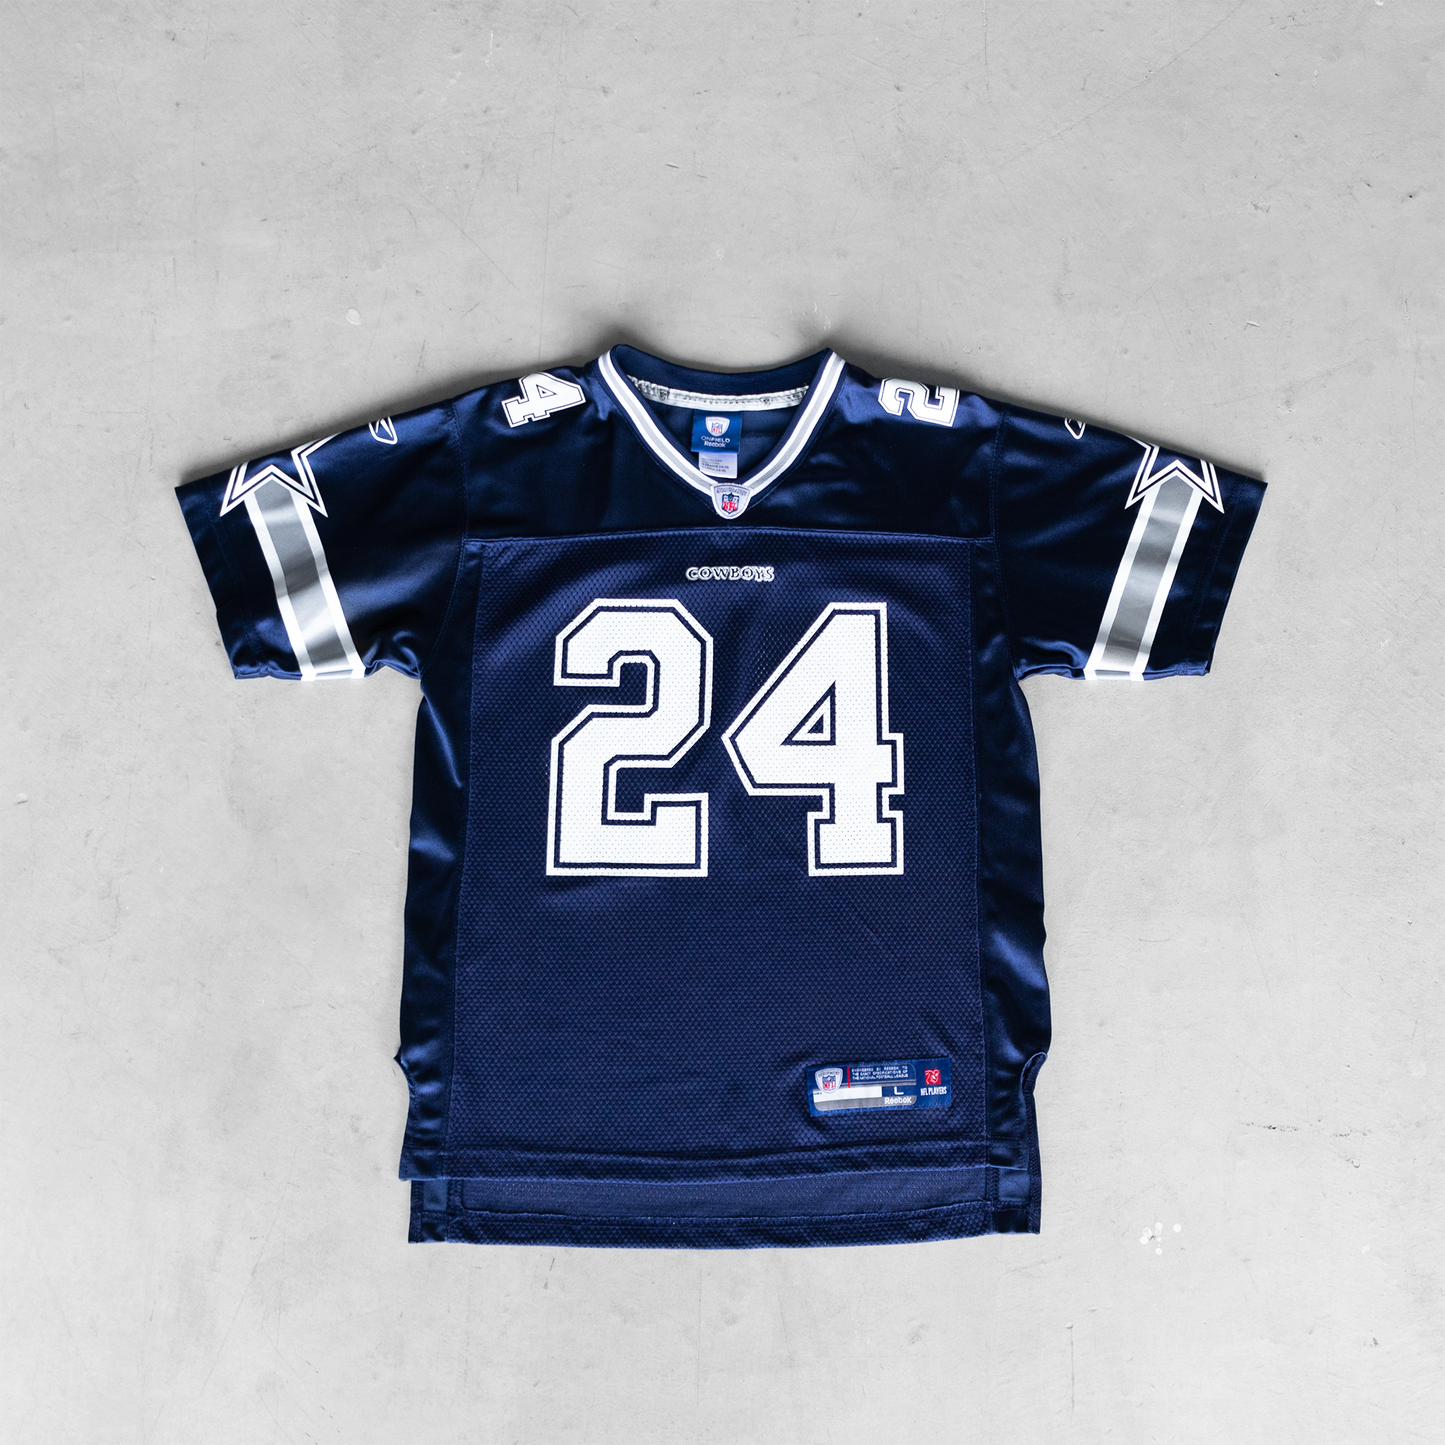 Vintage NFL Dallas Cowboys Marion Barber #24 Youth Football Jersey